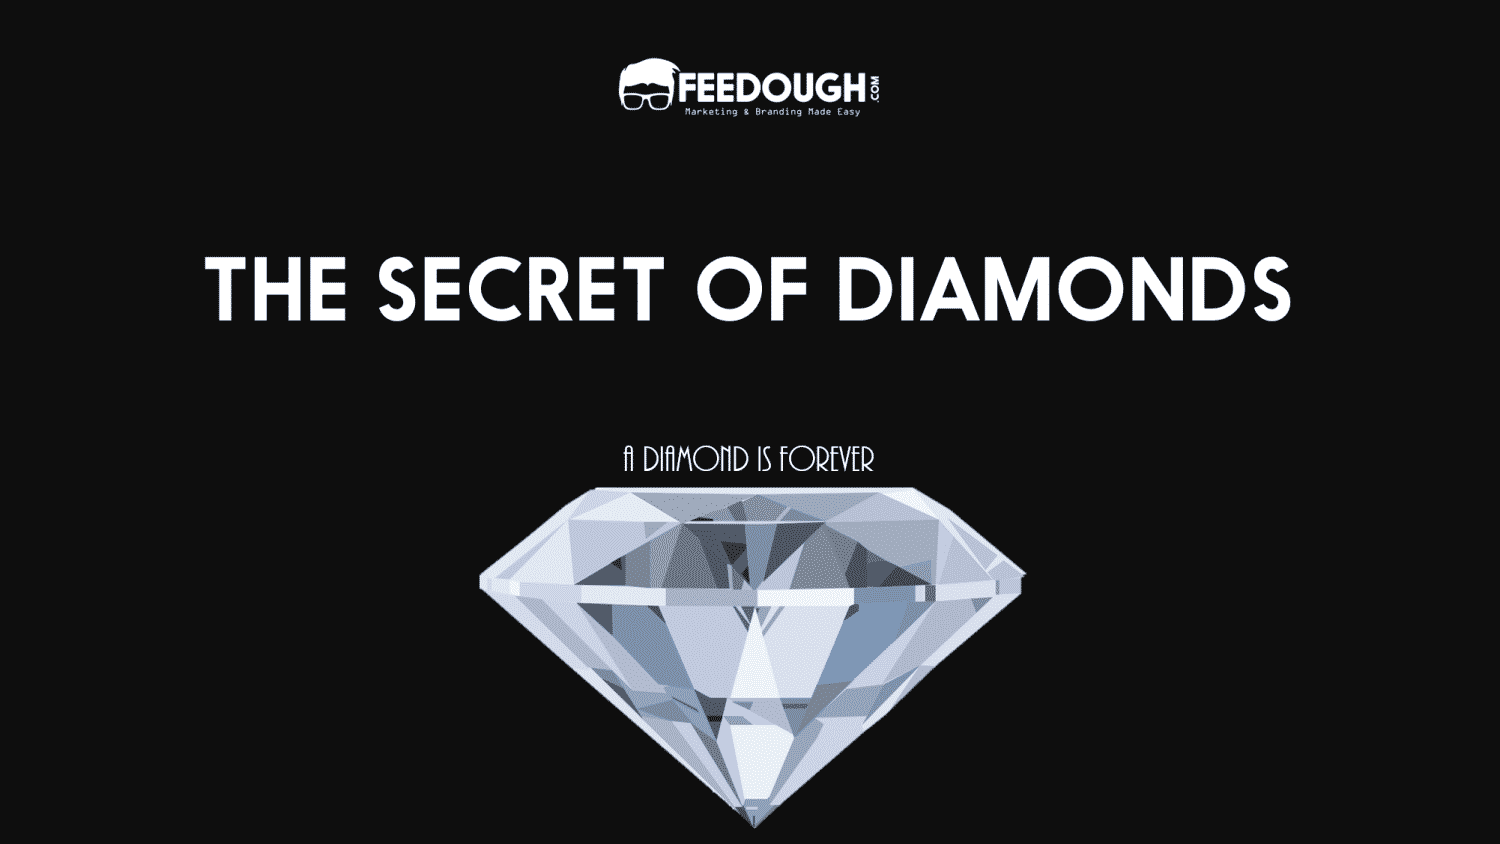 Diamonds Are Not Rare, They Are Just Expensive  De beers Diamond Marketing  Strategy – Feedough